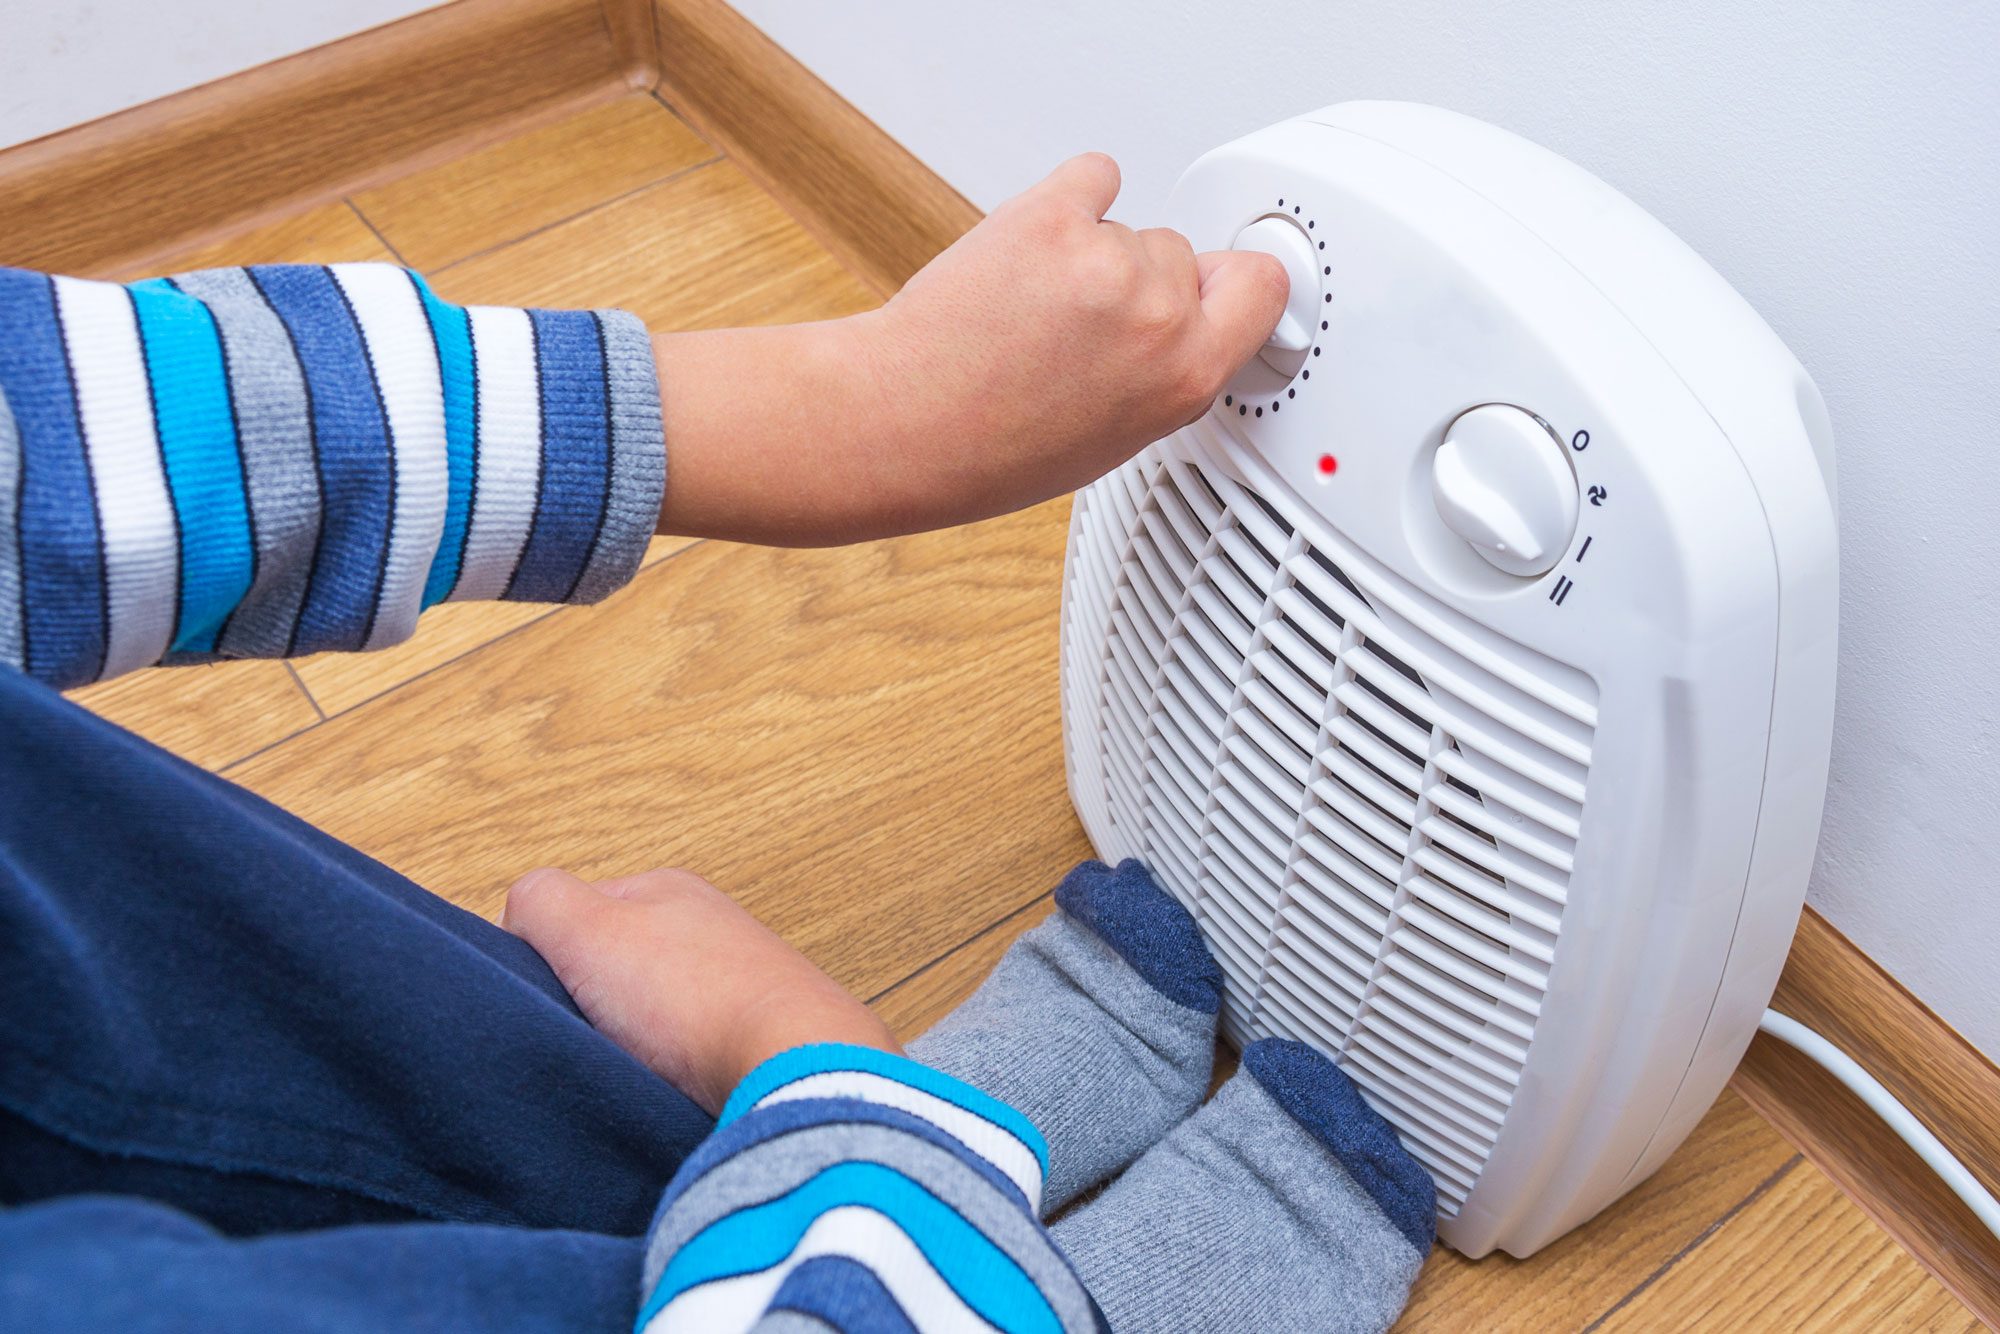 A Young Boy Warms Himself Near An Electric Fan Heater Sitting On The Floor